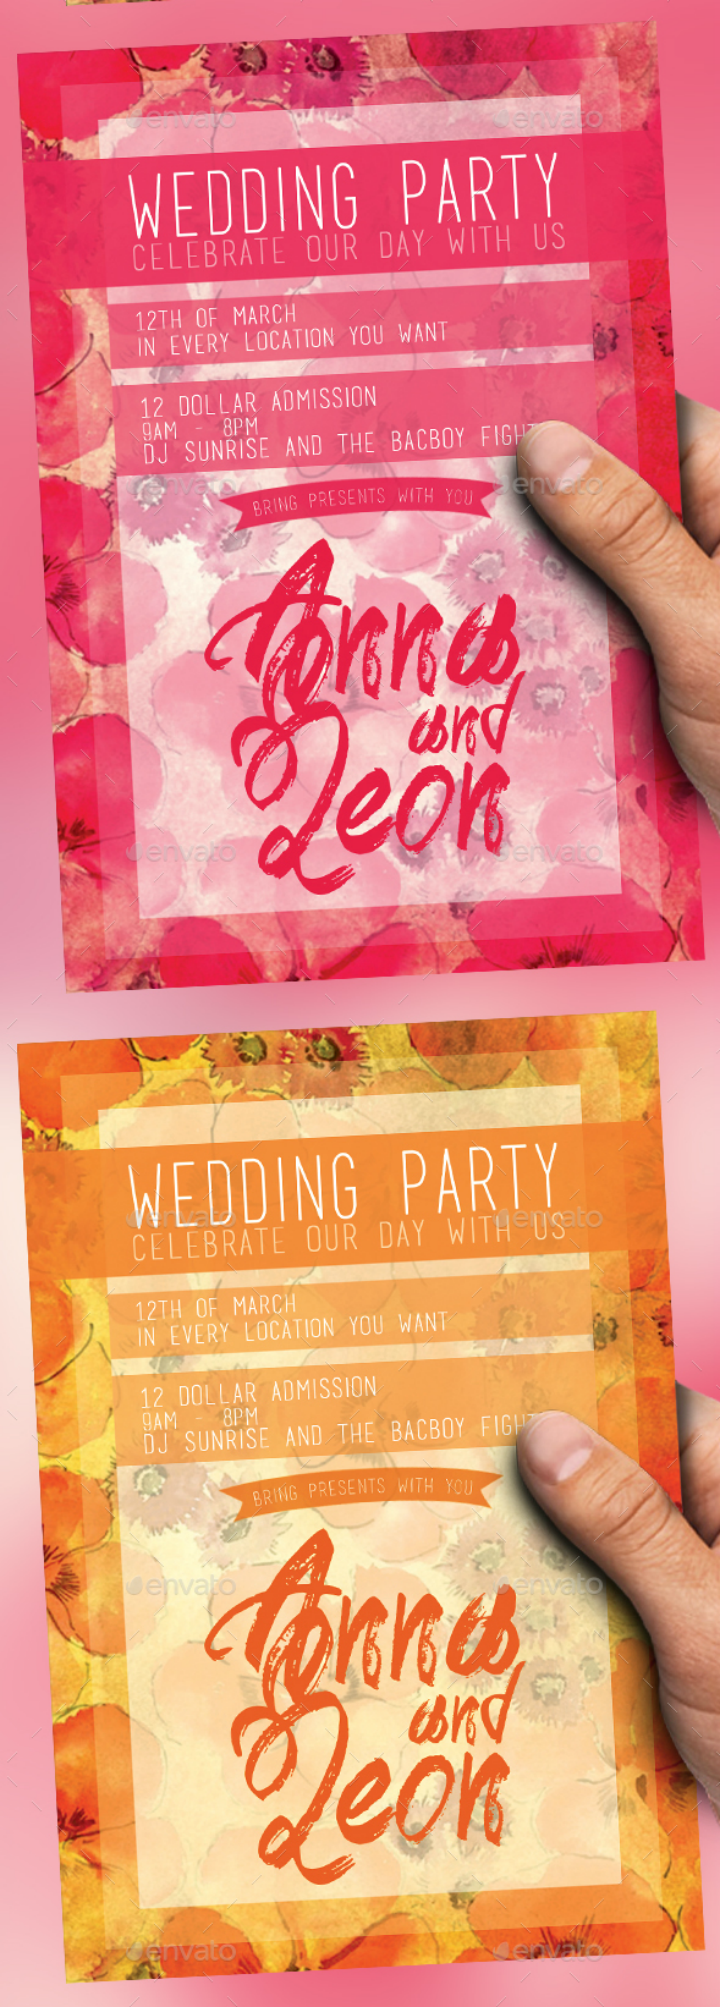 wedding party flyer template